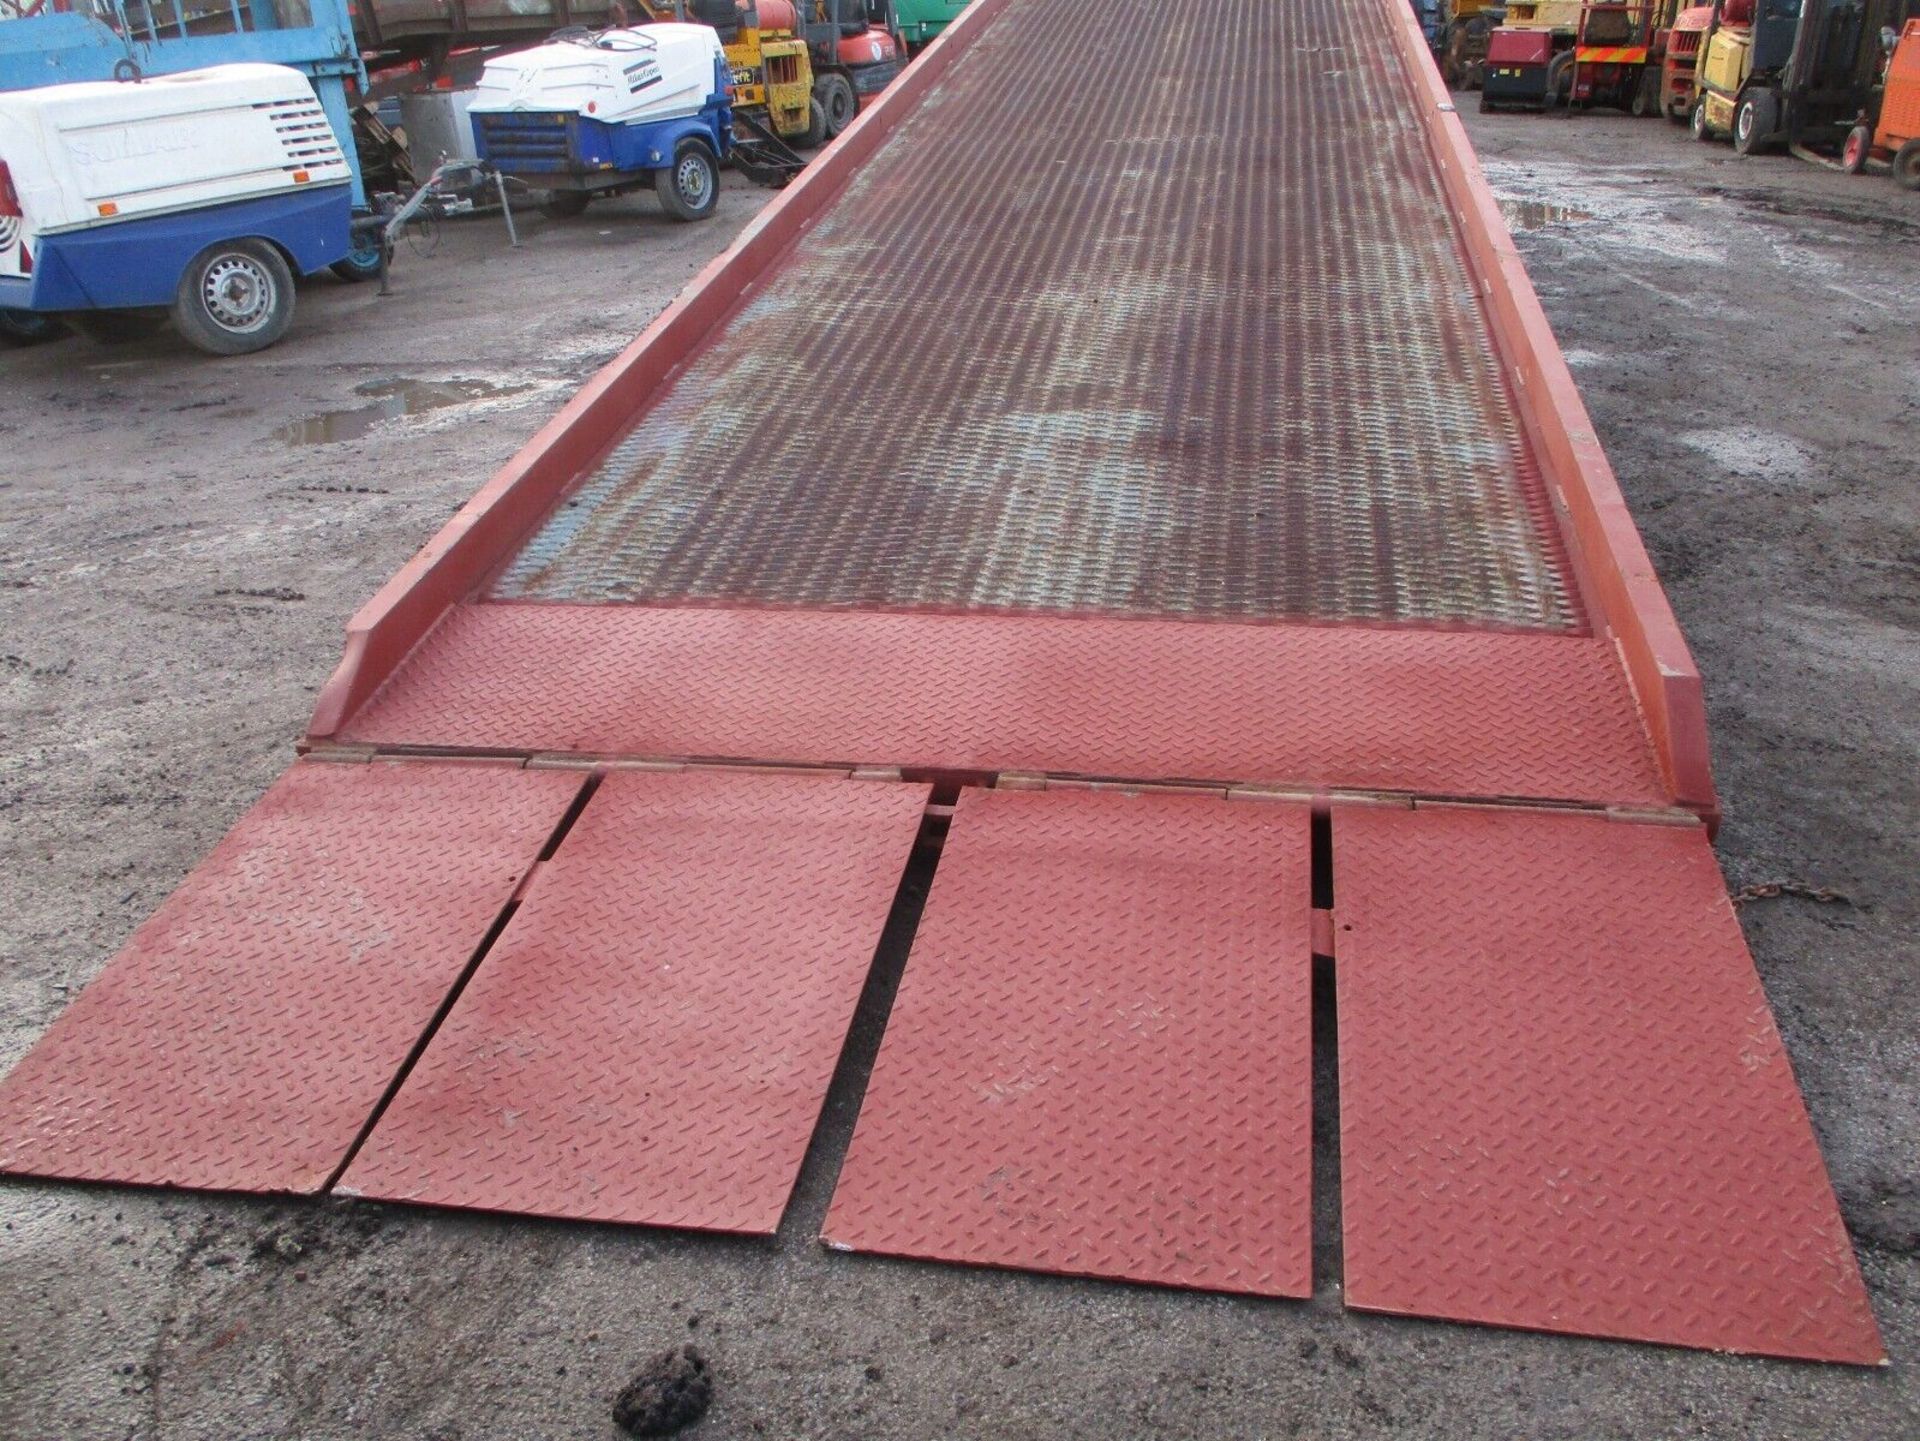 12 METRES LONG THORWORLD CONTAINER LOADING RAMP - Image 3 of 9